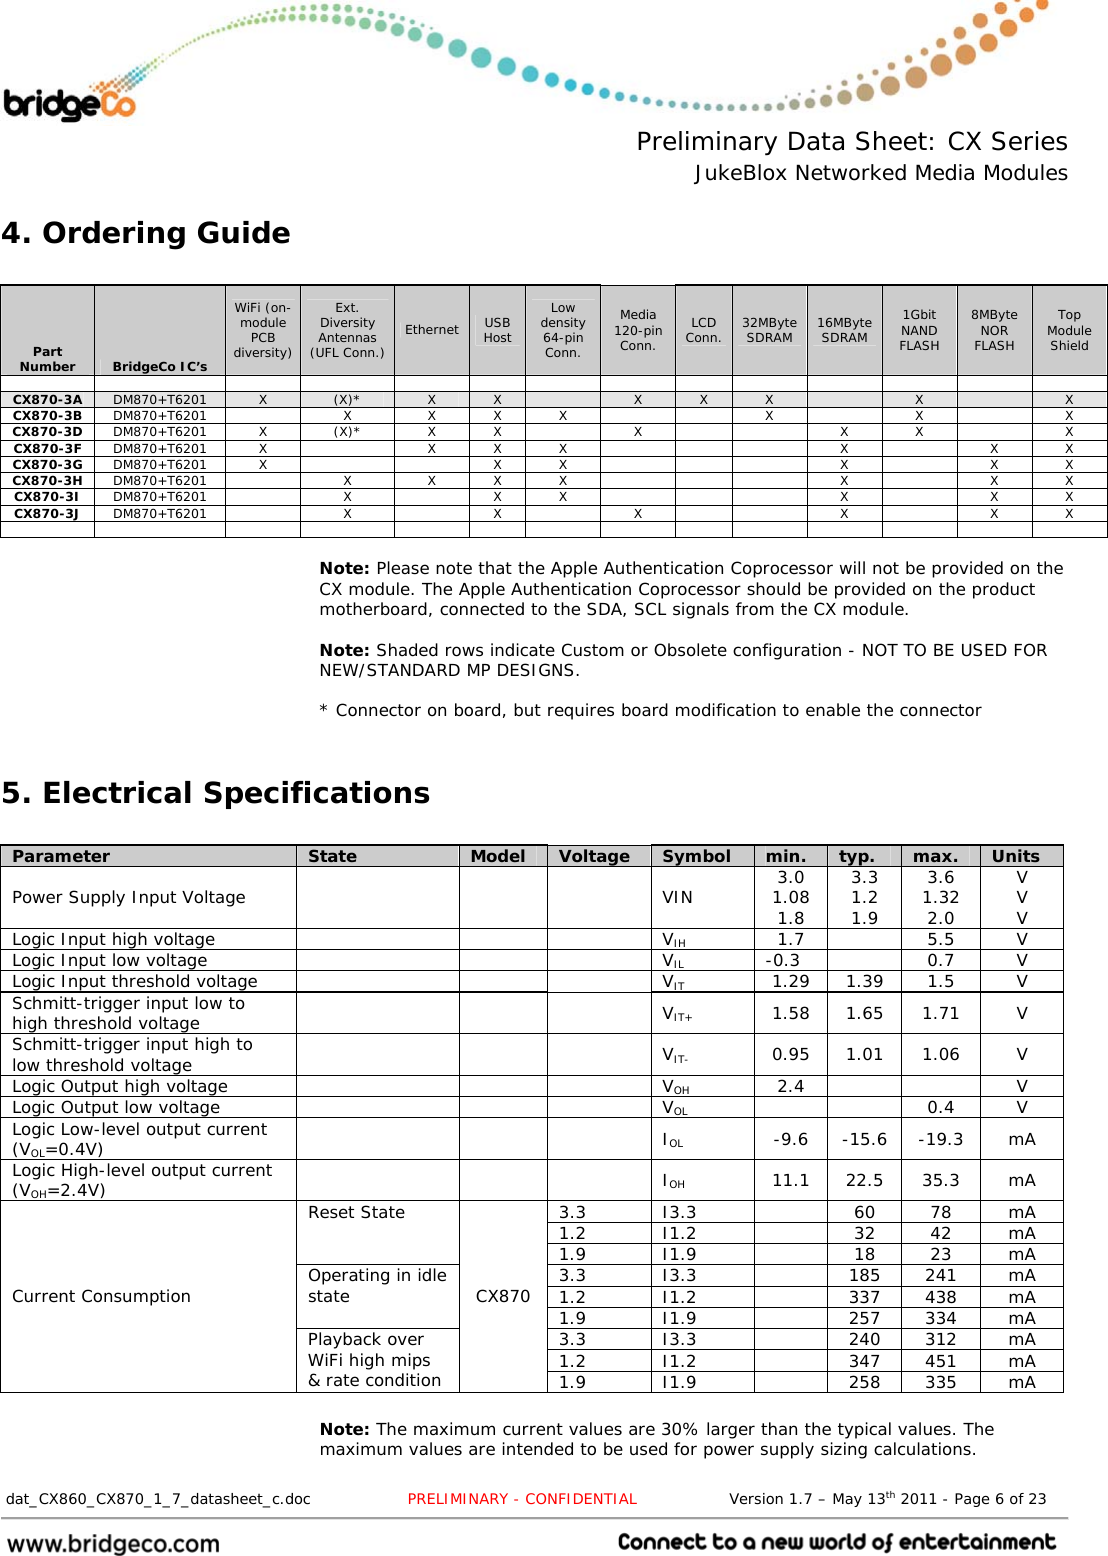  Preliminary Data Sheet: CX Series JukeBlox Networked Media Modules  dat_CX860_CX870_1_7_datasheet_c.doc                   PRELIMINARY - CONFIDENTIAL                  Version 1.7 – May 13th 2011 - Page 6 of 23                                 4. Ordering Guide  Part Number  BridgeCo IC’s WiFi (on-module PCB diversity) Ext. Diversity Antennas (UFL Conn.) Ethernet  USB Host Low density 64-pin Conn. Media 120-pin Conn. LCD Conn.  32MByte SDRAM  16MByte SDRAM 1Gbit NAND FLASH 8MByte NOR FLASH Top Module Shield                   CX870-3A  DM870+T6201  X  (X)*  X  X   X  X  X   X   X CX870-3B  DM870+T6201   X  X X X   X  X  X CX870-3D  DM870+T6201 X (X)* X X  X   X X  X CX870-3F DM870+T6201 X    X X X        X    X  X CX870-3G DM870+T6201 X     X X      X    X X CX870-3H DM870+T6201   X  X X X        X    X  X CX870-3I DM870+T6201   X   X X      X    X X CX870-3J  DM870+T6201   X   X  X   X  X X                    Note: Please note that the Apple Authentication Coprocessor will not be provided on the CX module. The Apple Authentication Coprocessor should be provided on the product motherboard, connected to the SDA, SCL signals from the CX module.  Note: Shaded rows indicate Custom or Obsolete configuration - NOT TO BE USED FOR NEW/STANDARD MP DESIGNS.  * Connector on board, but requires board modification to enable the connector  5. Electrical Specifications  Parameter  State  Model  Voltage  Symbol  min.  typ.  max.  Units Power Supply Input Voltage     VIN  3.0 1.08 1.8 3.3 1.2 1.9 3.6 1.32 2.0 V V V Logic Input high voltage        VIH 1.7  5.5 V Logic Input low voltage        VIL -0.3  0.7 V Logic Input threshold voltage        VIT 1.29 1.39 1.5 V Schmitt-trigger input low to high threshold voltage     VIT+ 1.58 1.65 1.71 V Schmitt-trigger input high to low threshold voltage     VIT- 0.95 1.01 1.06 V Logic Output high voltage        VOH 2.4   V Logic Output low voltage        VOL   0.4 V Logic Low-level output current (VOL=0.4V)     IOL -9.6 -15.6 -19.3 mA Logic High-level output current (VOH=2.4V)     IOH 11.1 22.5 35.3 mA 3.3 I3.3   60 78 mA 1.2 I1.2   32 42 mA Reset State 1.9 I1.9   18 23 mA 3.3 I3.3   185 241 mA 1.2 I1.2   337 438 mA Operating in idle state  1.9 I1.9   257 334 mA 3.3 I3.3   240 312 mA 1.2 I1.2   347 451 mA Current Consumption Playback over WiFi high mips &amp; rate condition CX870 1.9 I1.9   258 335 mA  Note: The maximum current values are 30% larger than the typical values. The maximum values are intended to be used for power supply sizing calculations.  